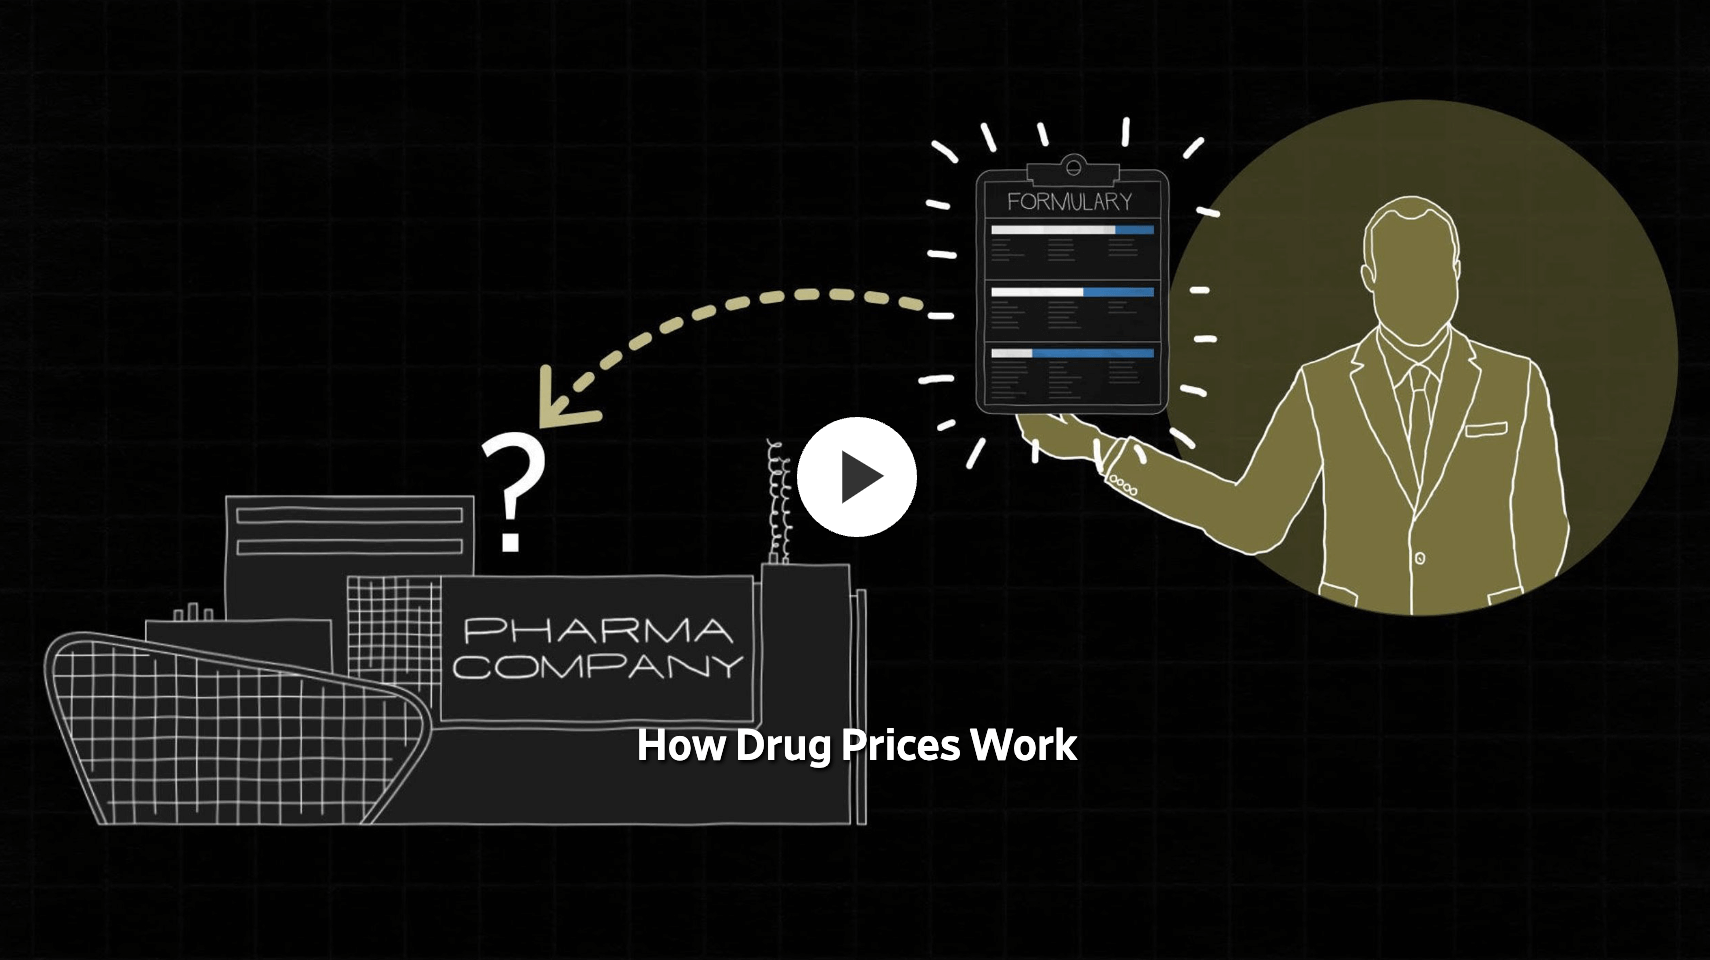 Wall Street Journal - Congress Investigates How Pharma Middlemen Affect Drug Prices